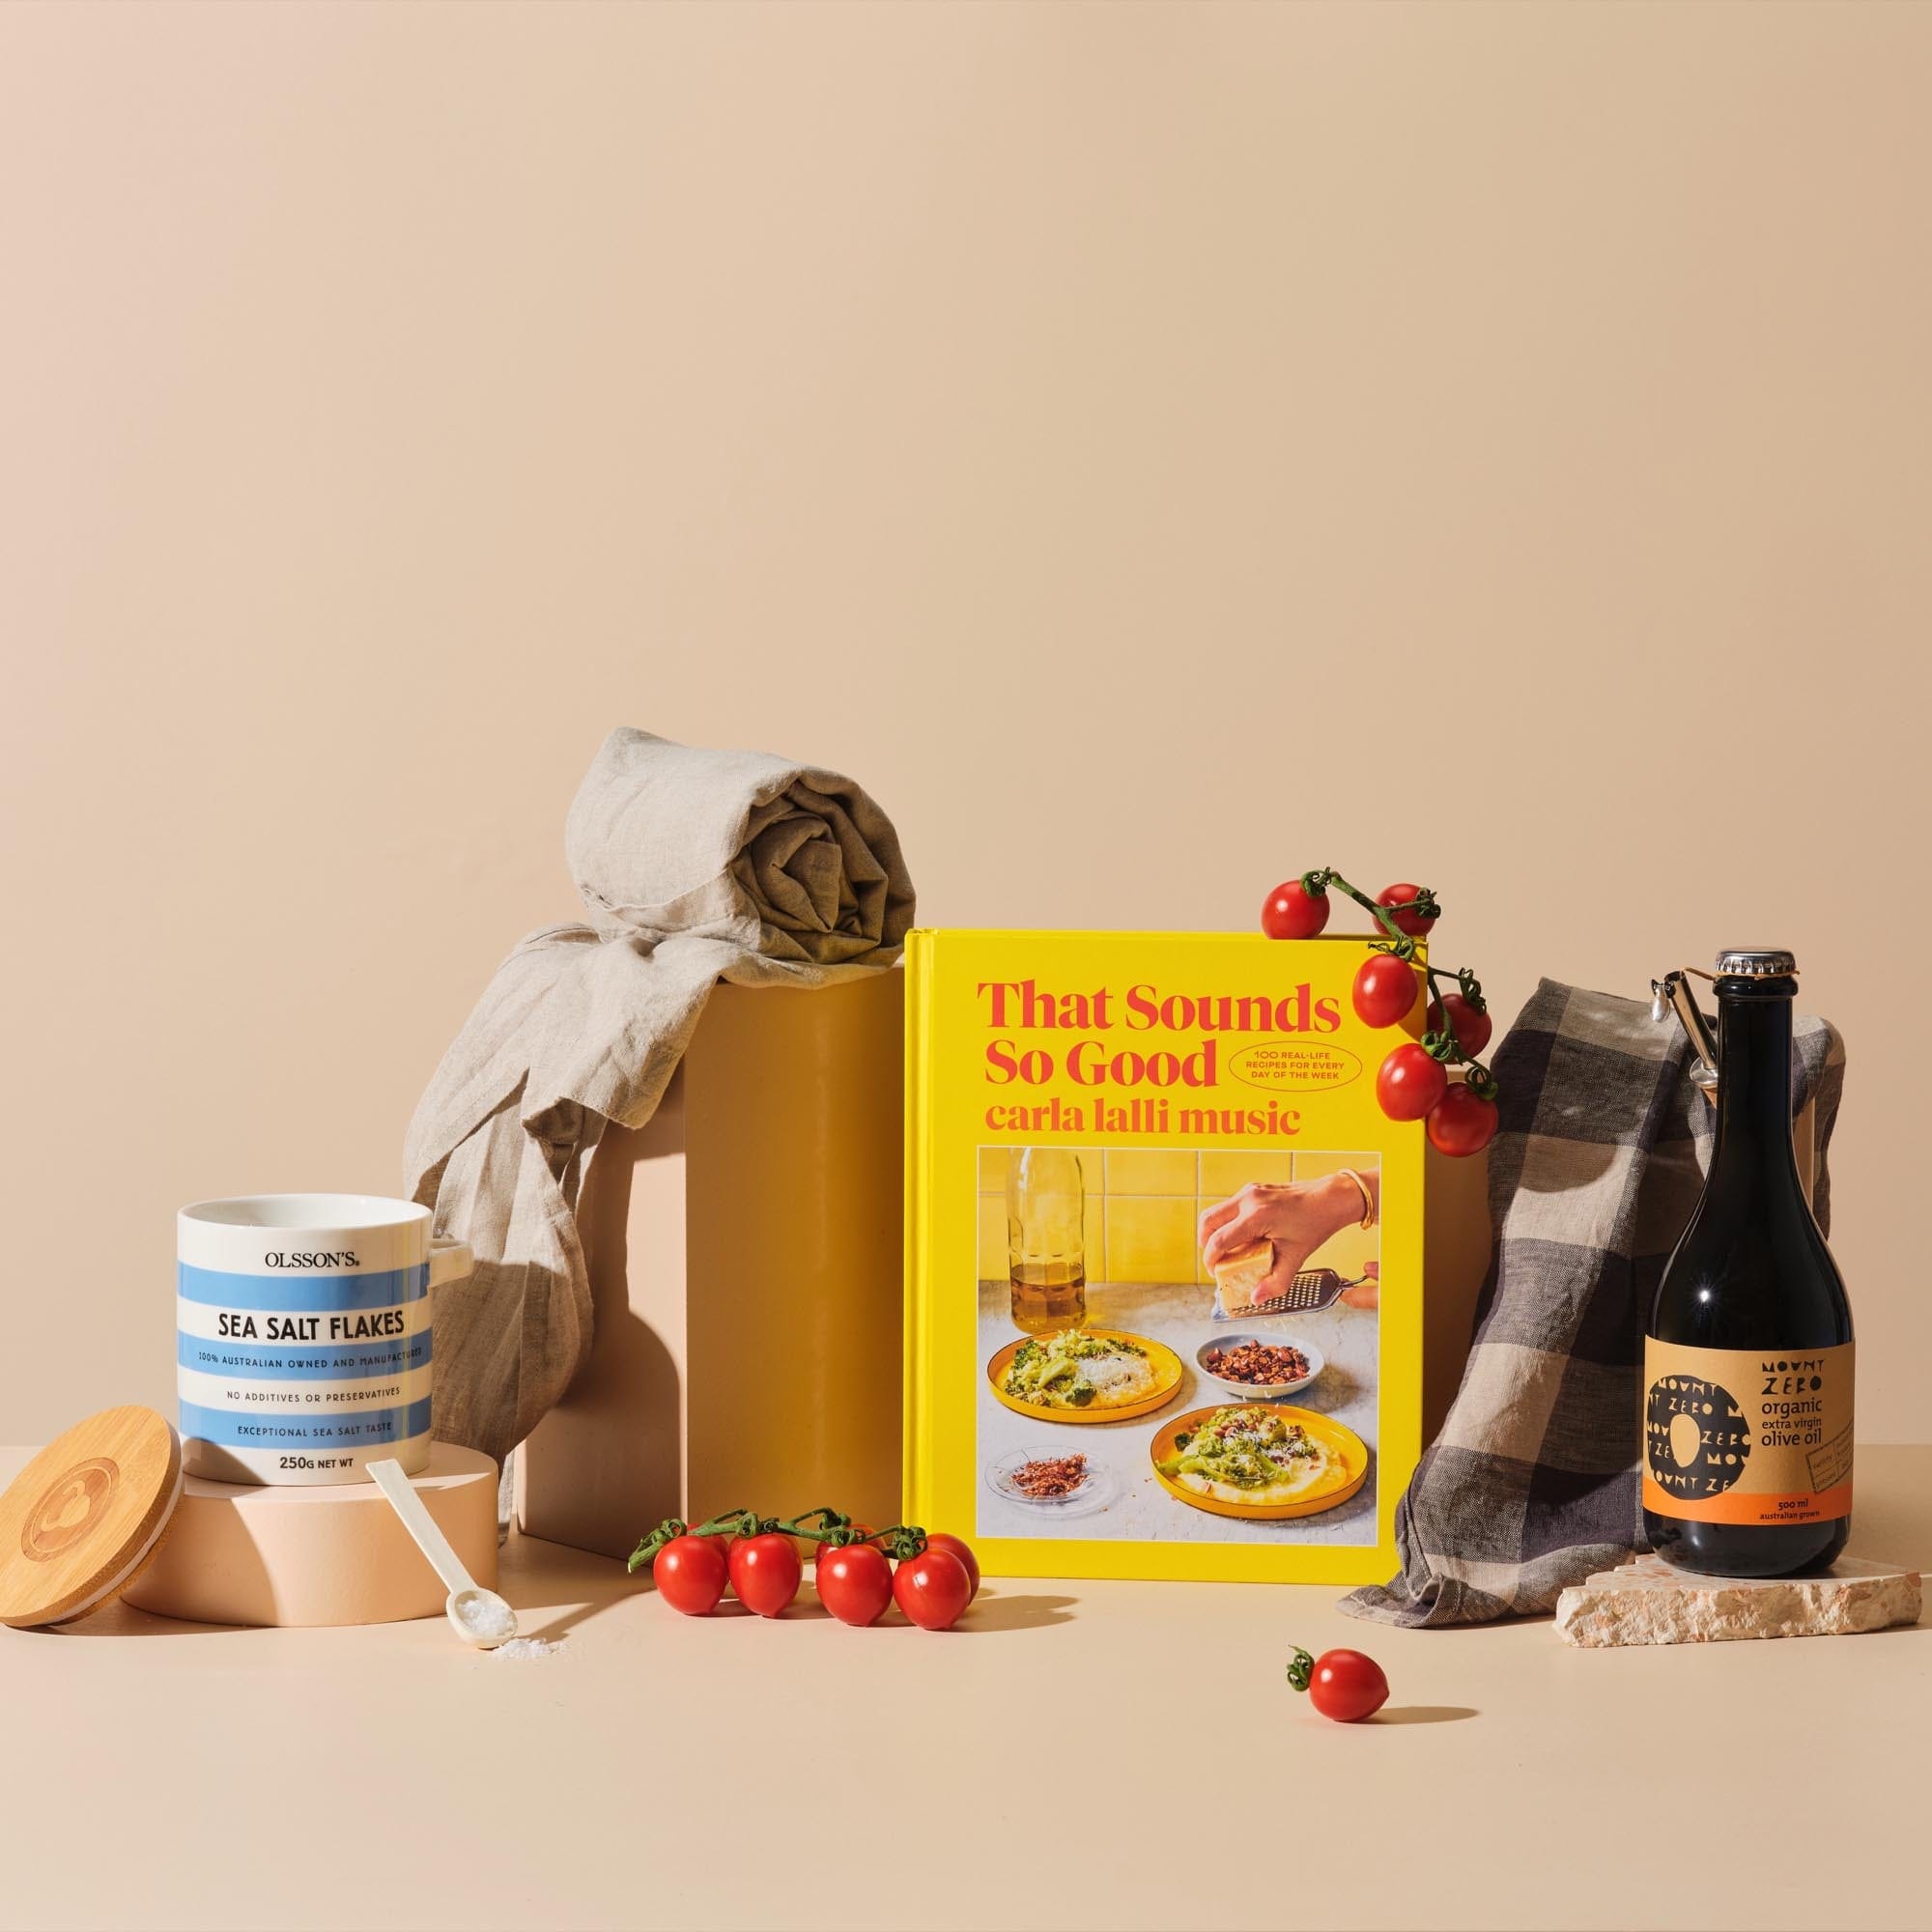 This is the Larder Love gift bundle from Handsel. Included in this image is That Sounds So Good, Olive oil, Sea salt flakes and an Apron/Tea towel